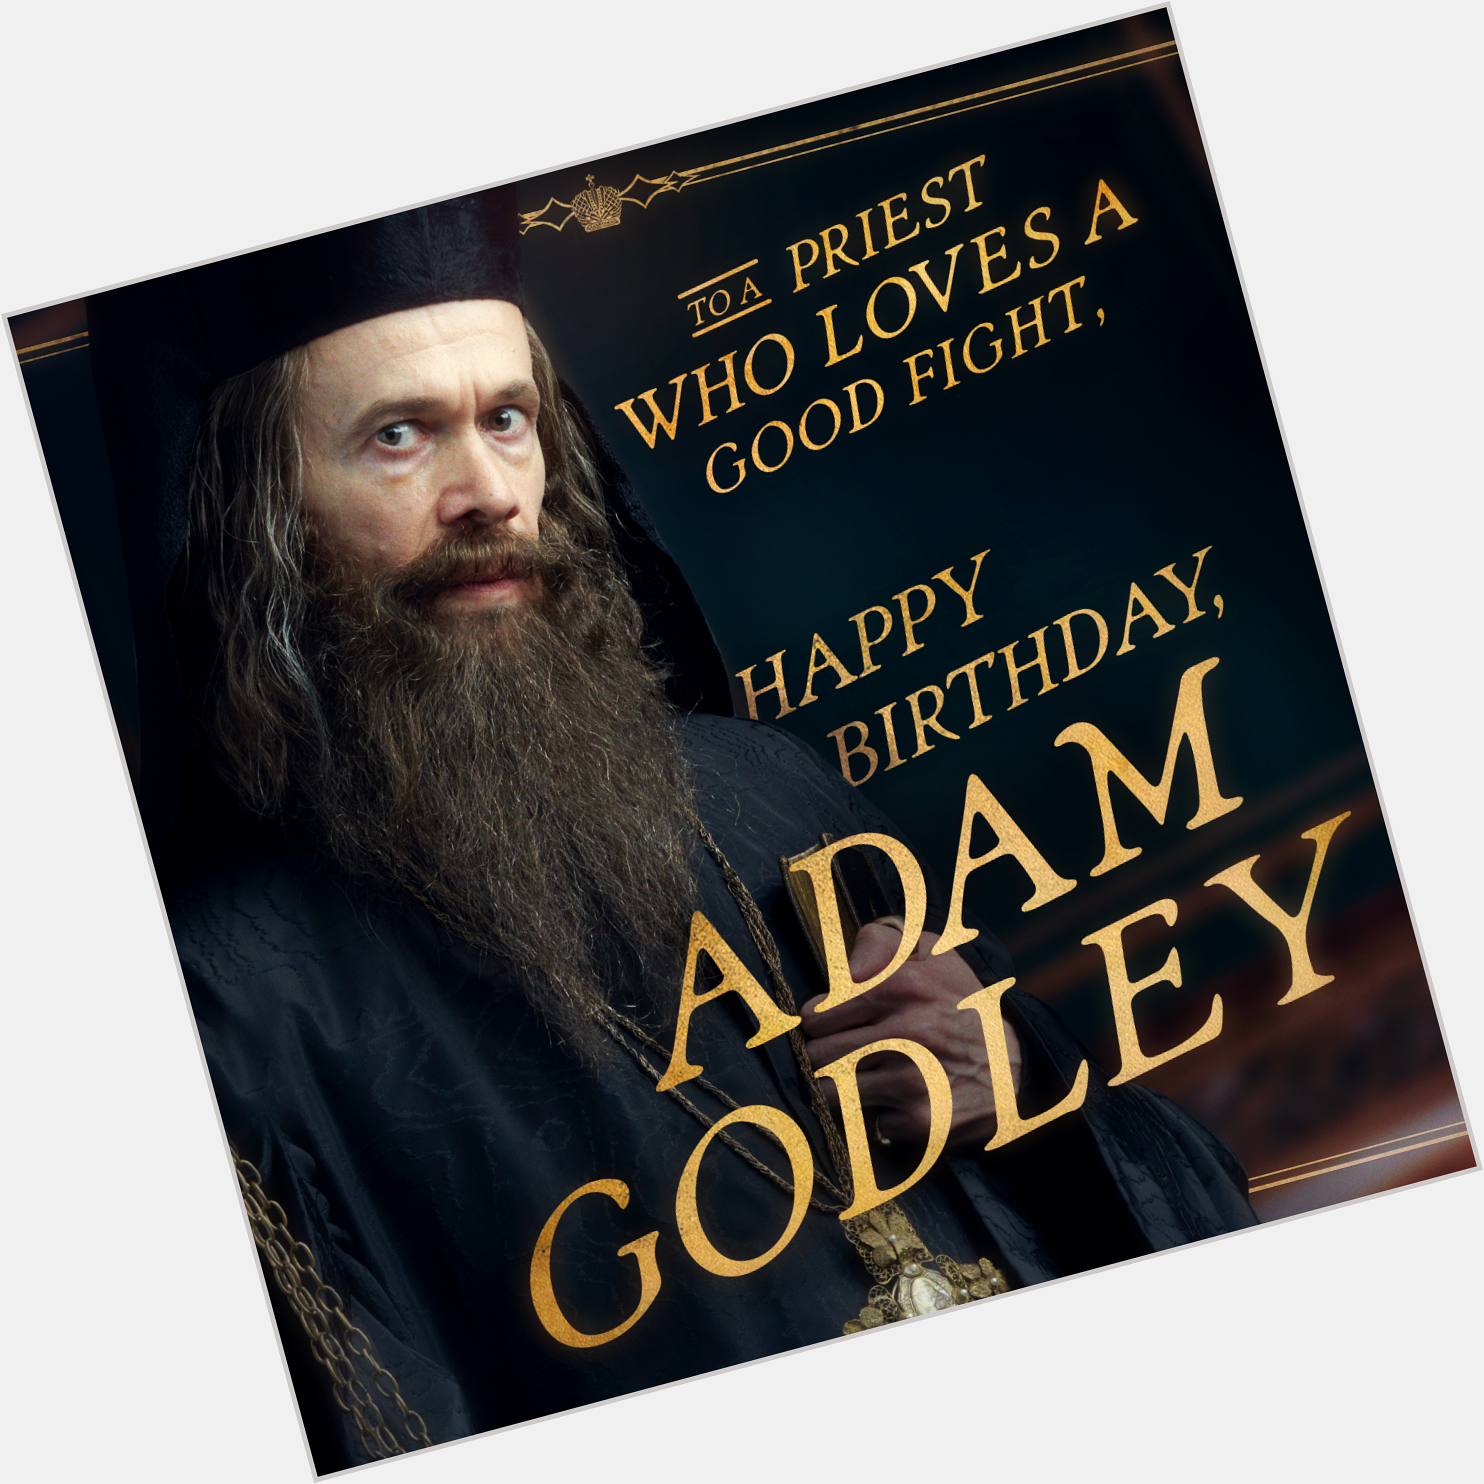 We are truly blessed to have you in our court, Adam Godley. Happy birthday! 